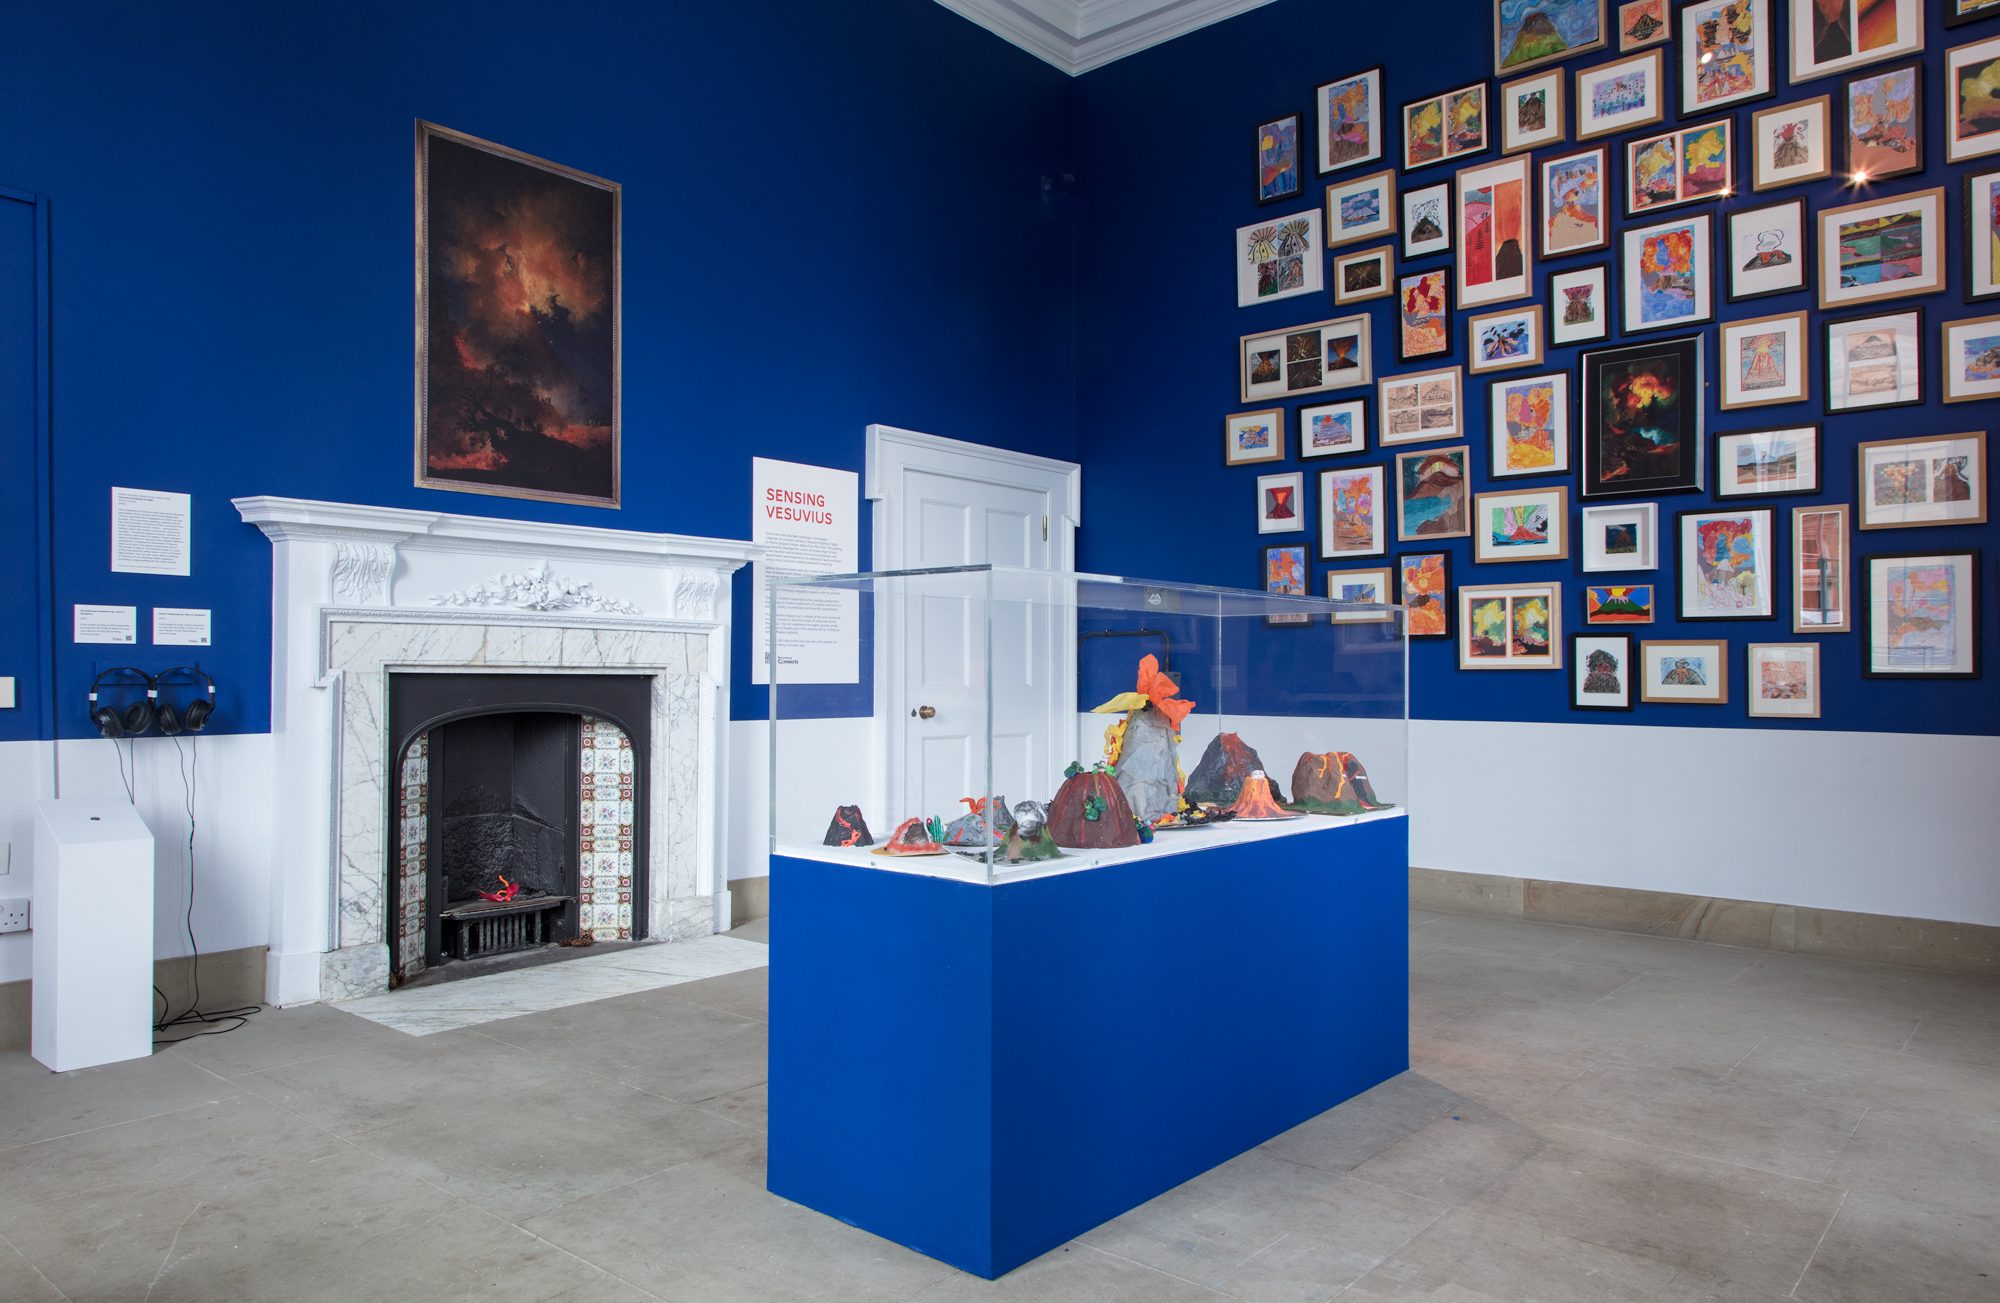 An art gallery exhibition space with deep blue walls displaying numerous framed artworks, featuring a large landscape painting, a decorative fireplace, information panels, and a central pedestal with sculpted forms exhibited.